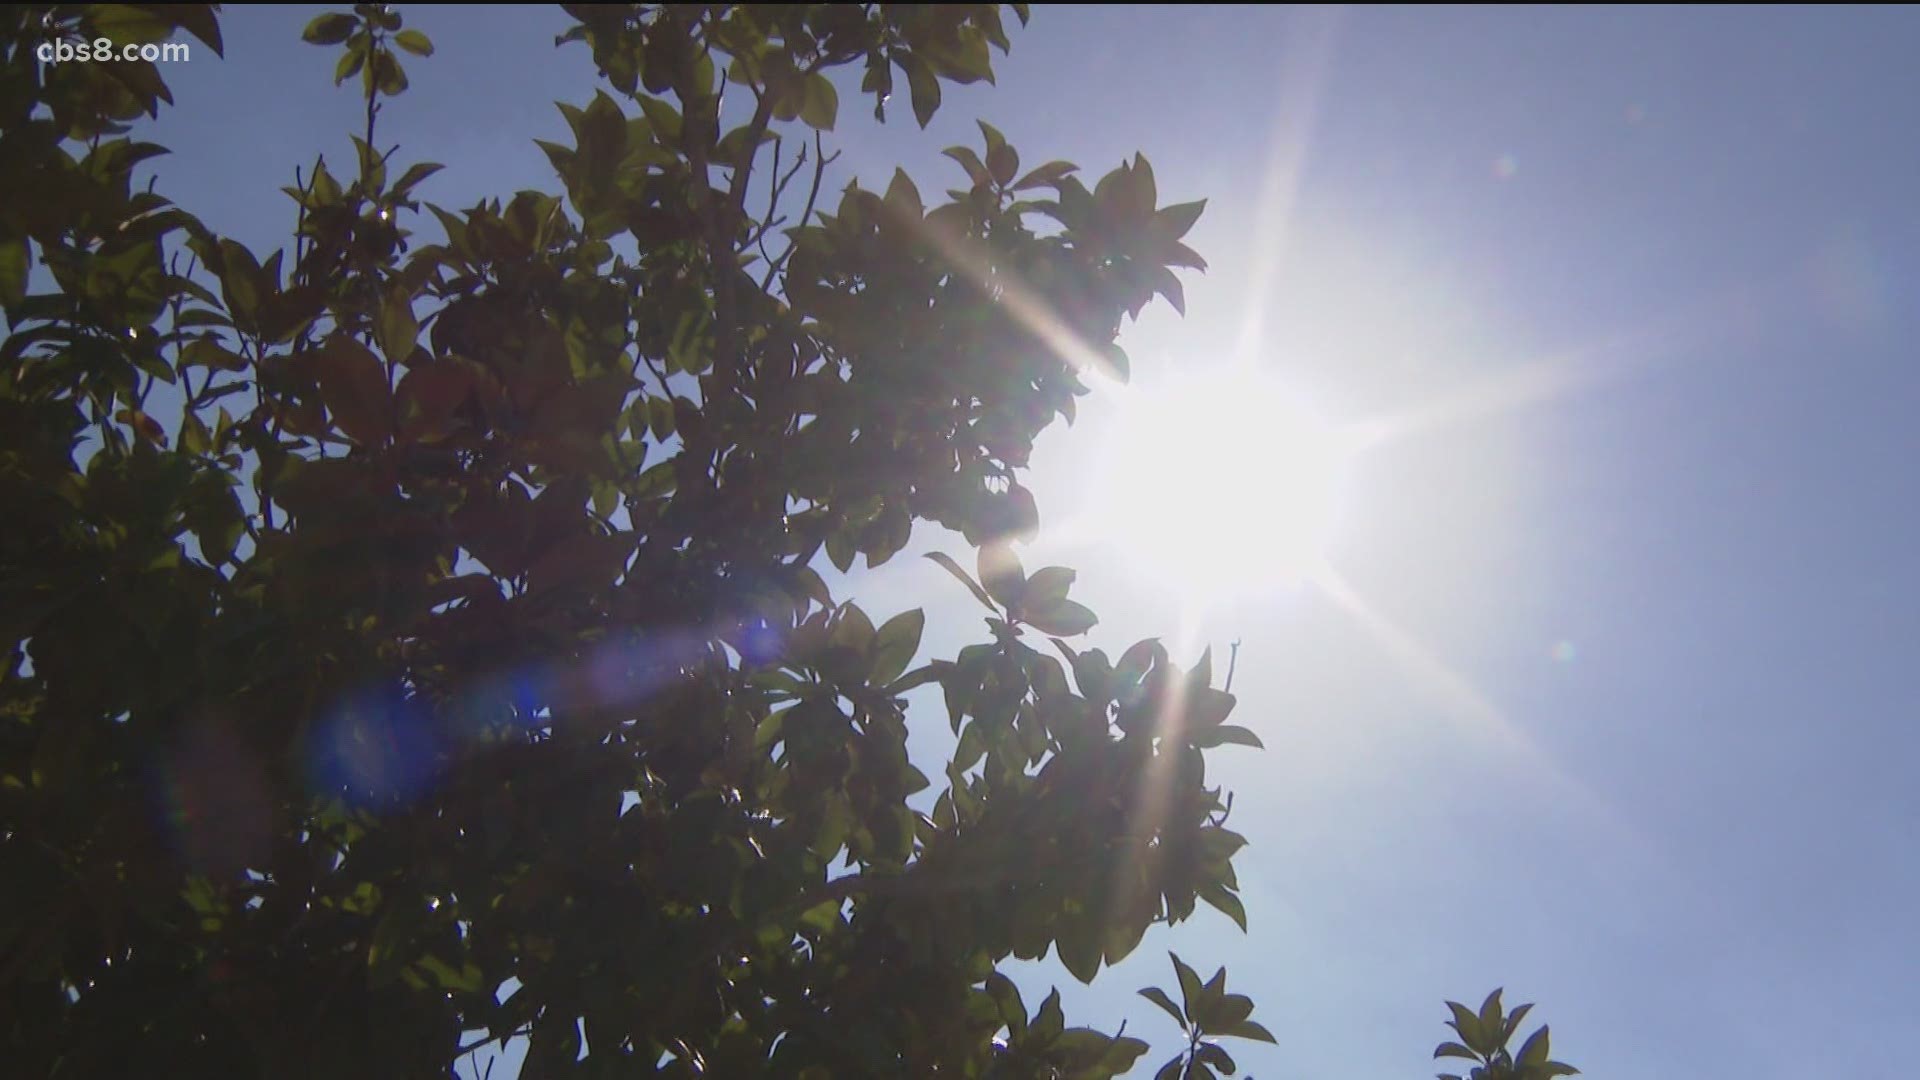 According to the NWS, places like Escondido could break all-time heat records.